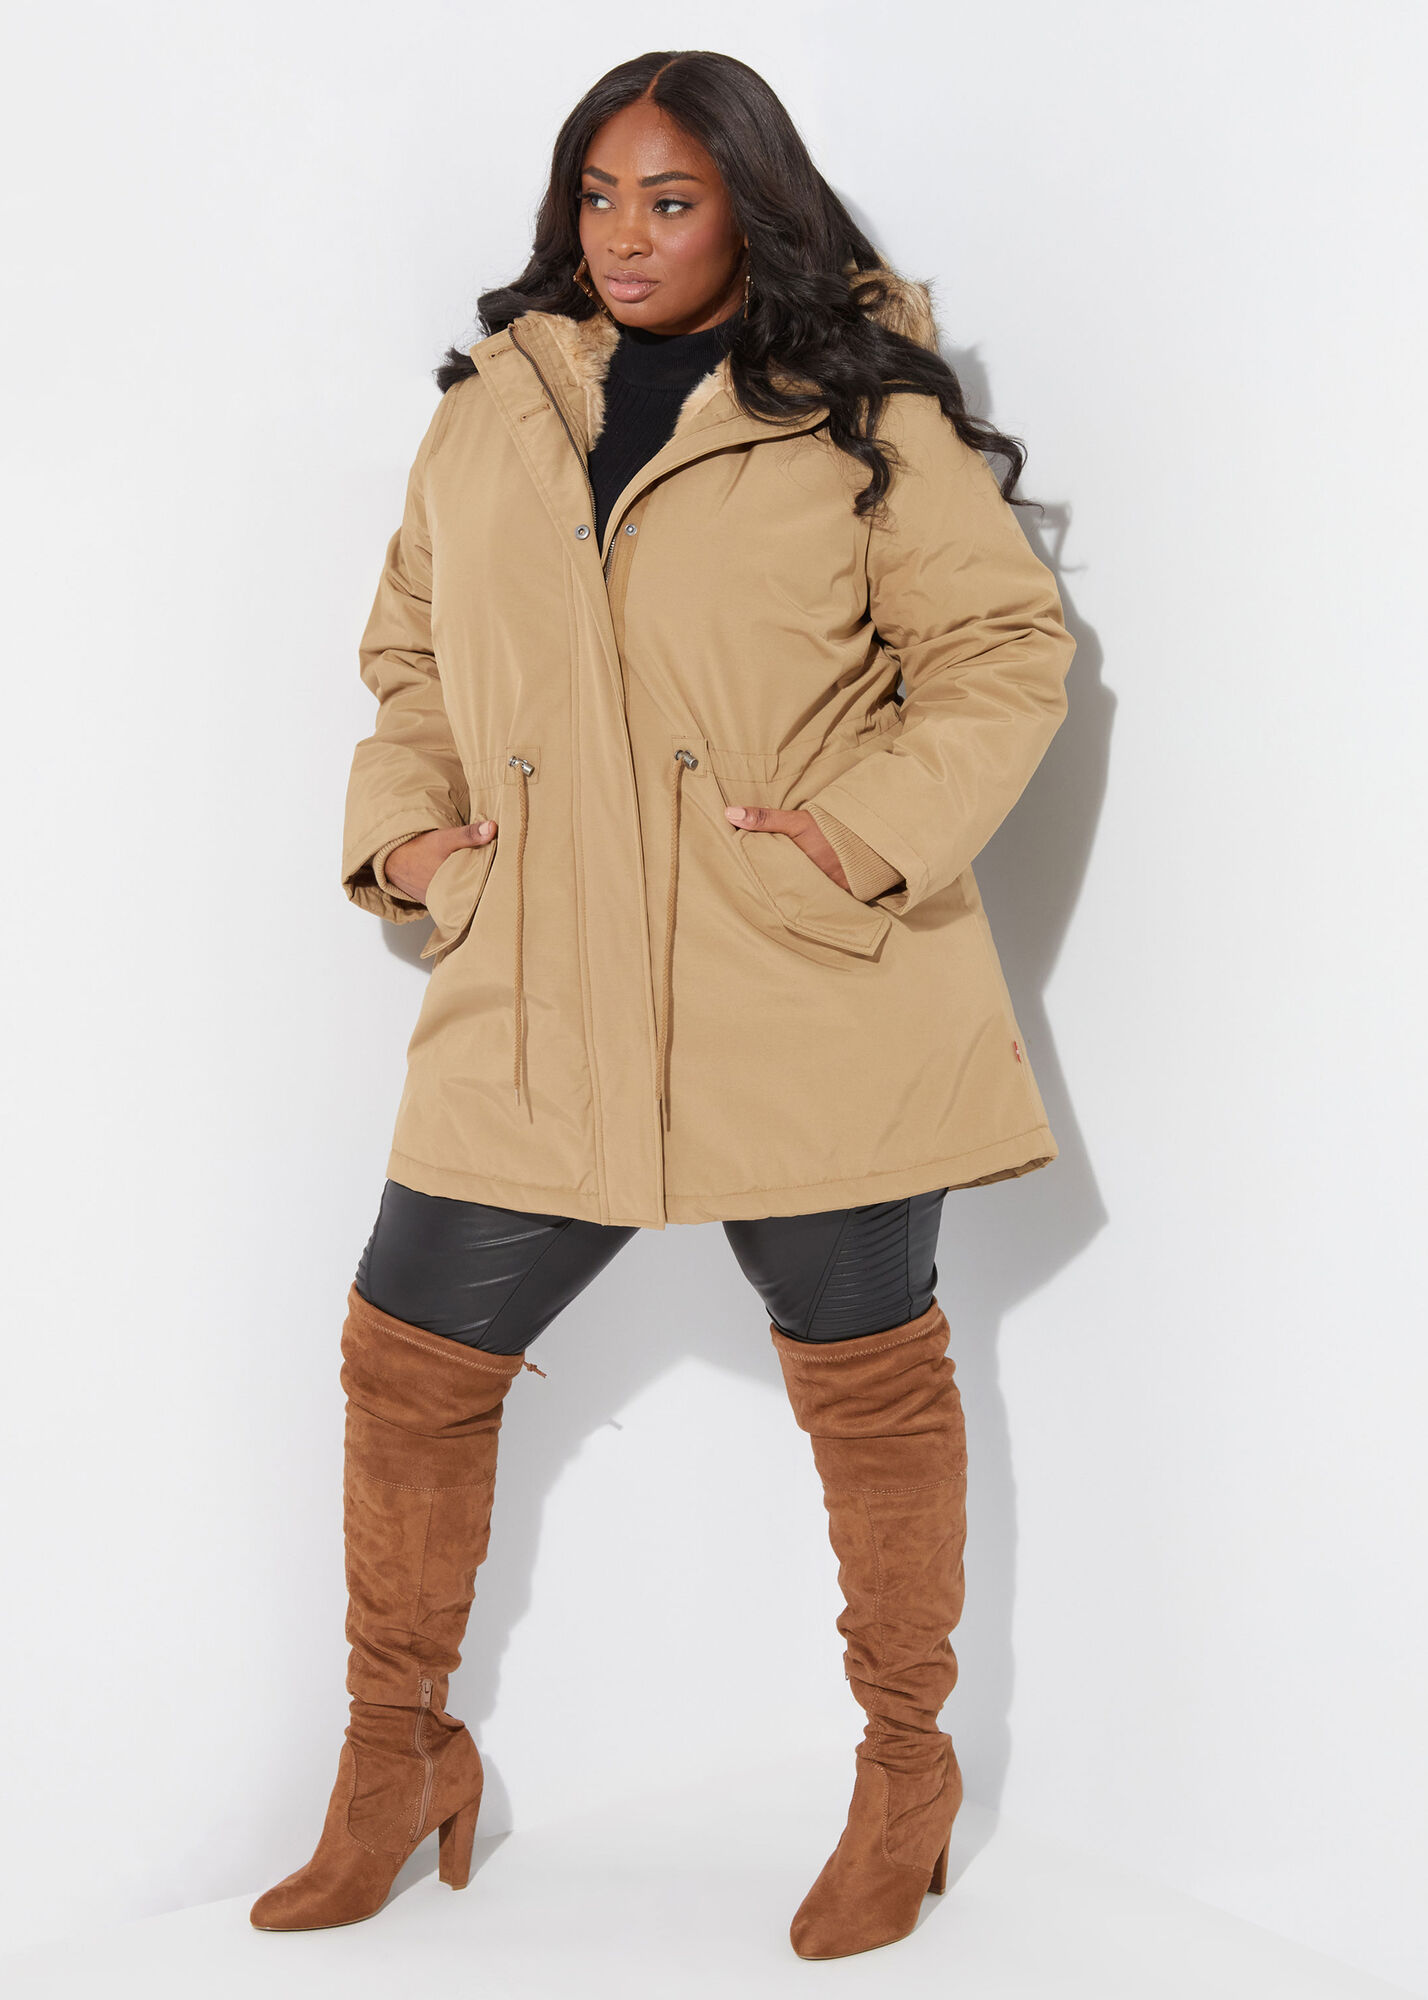 Plus Size Levi's Outerwear Quilted Cozy Warm Parka Coat Cute Puffer